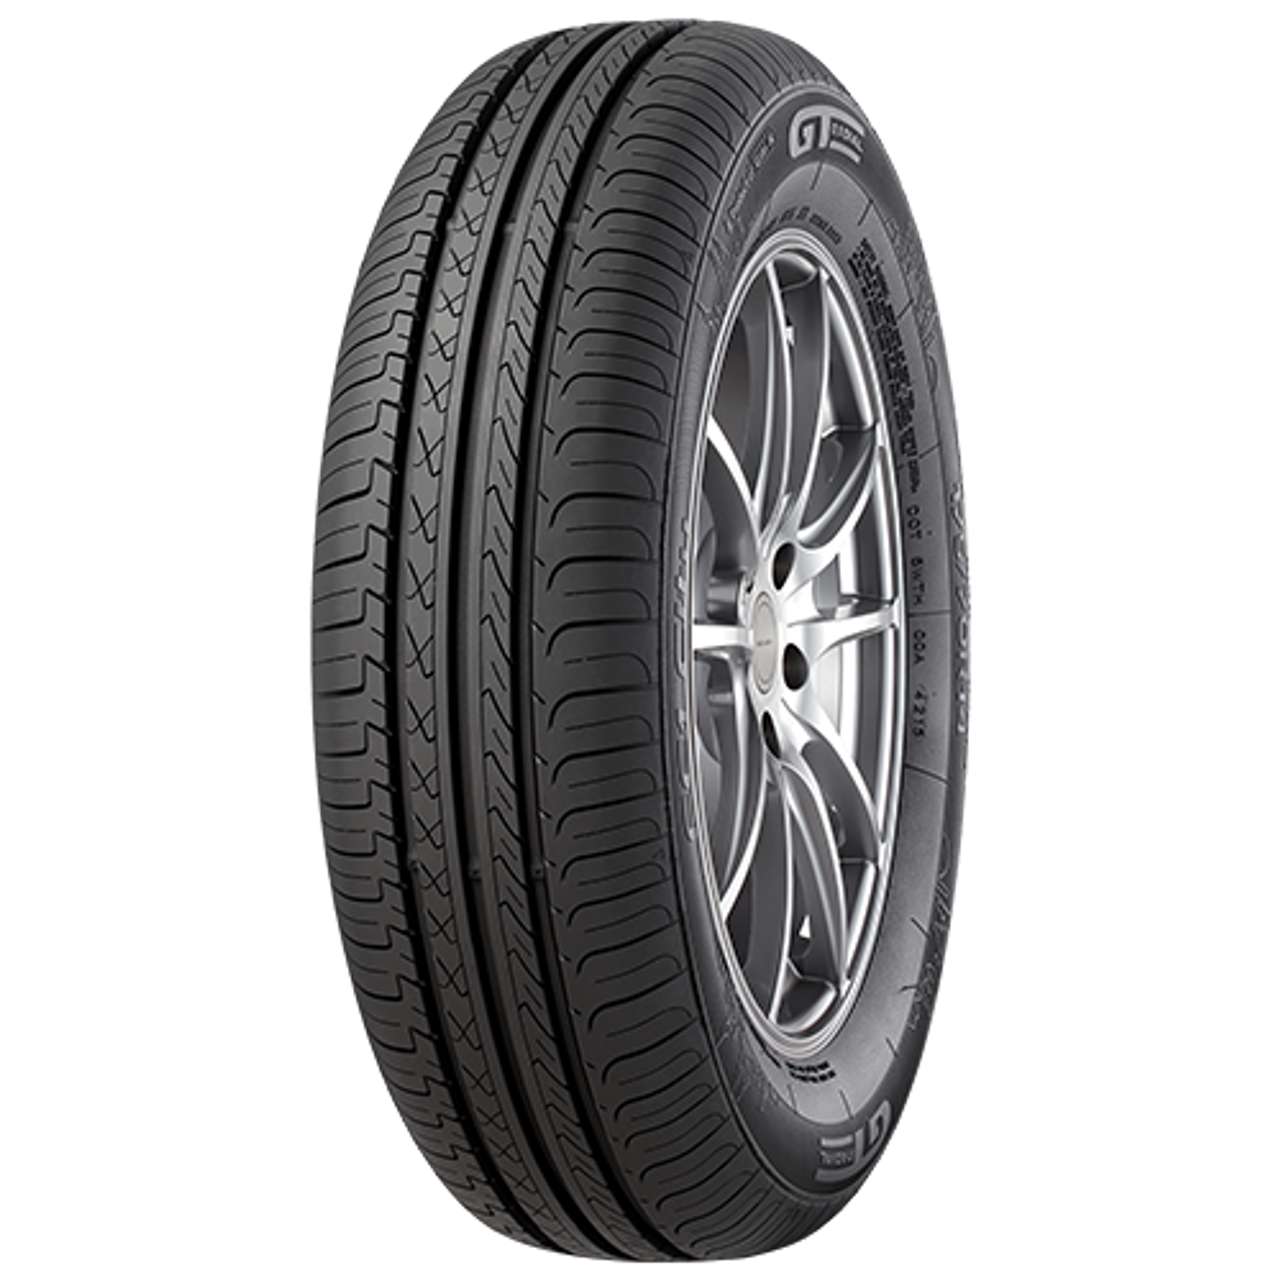 GT-RADIAL FE1 CITY 165/80R13 83T BSW